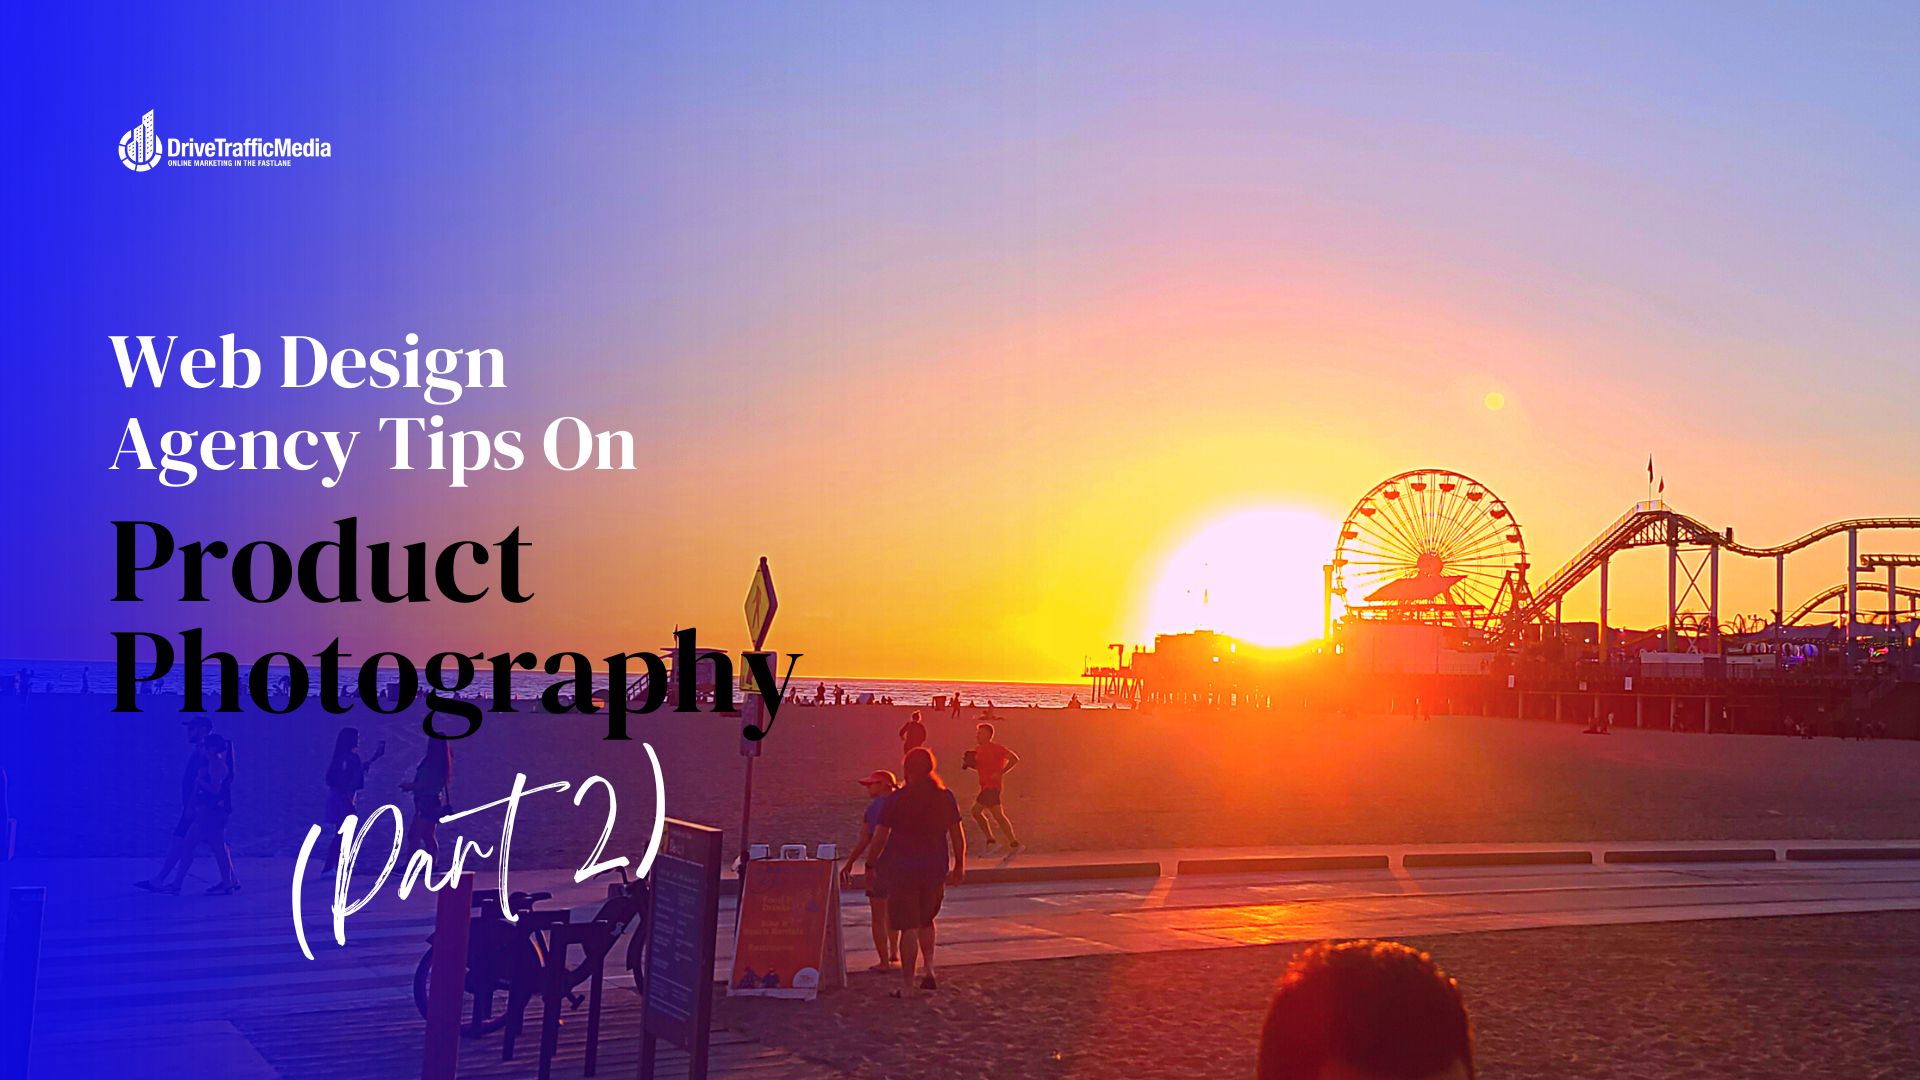 impress-your-customers-with-los-angeles-web-design-agencys-tips-on-product-photography